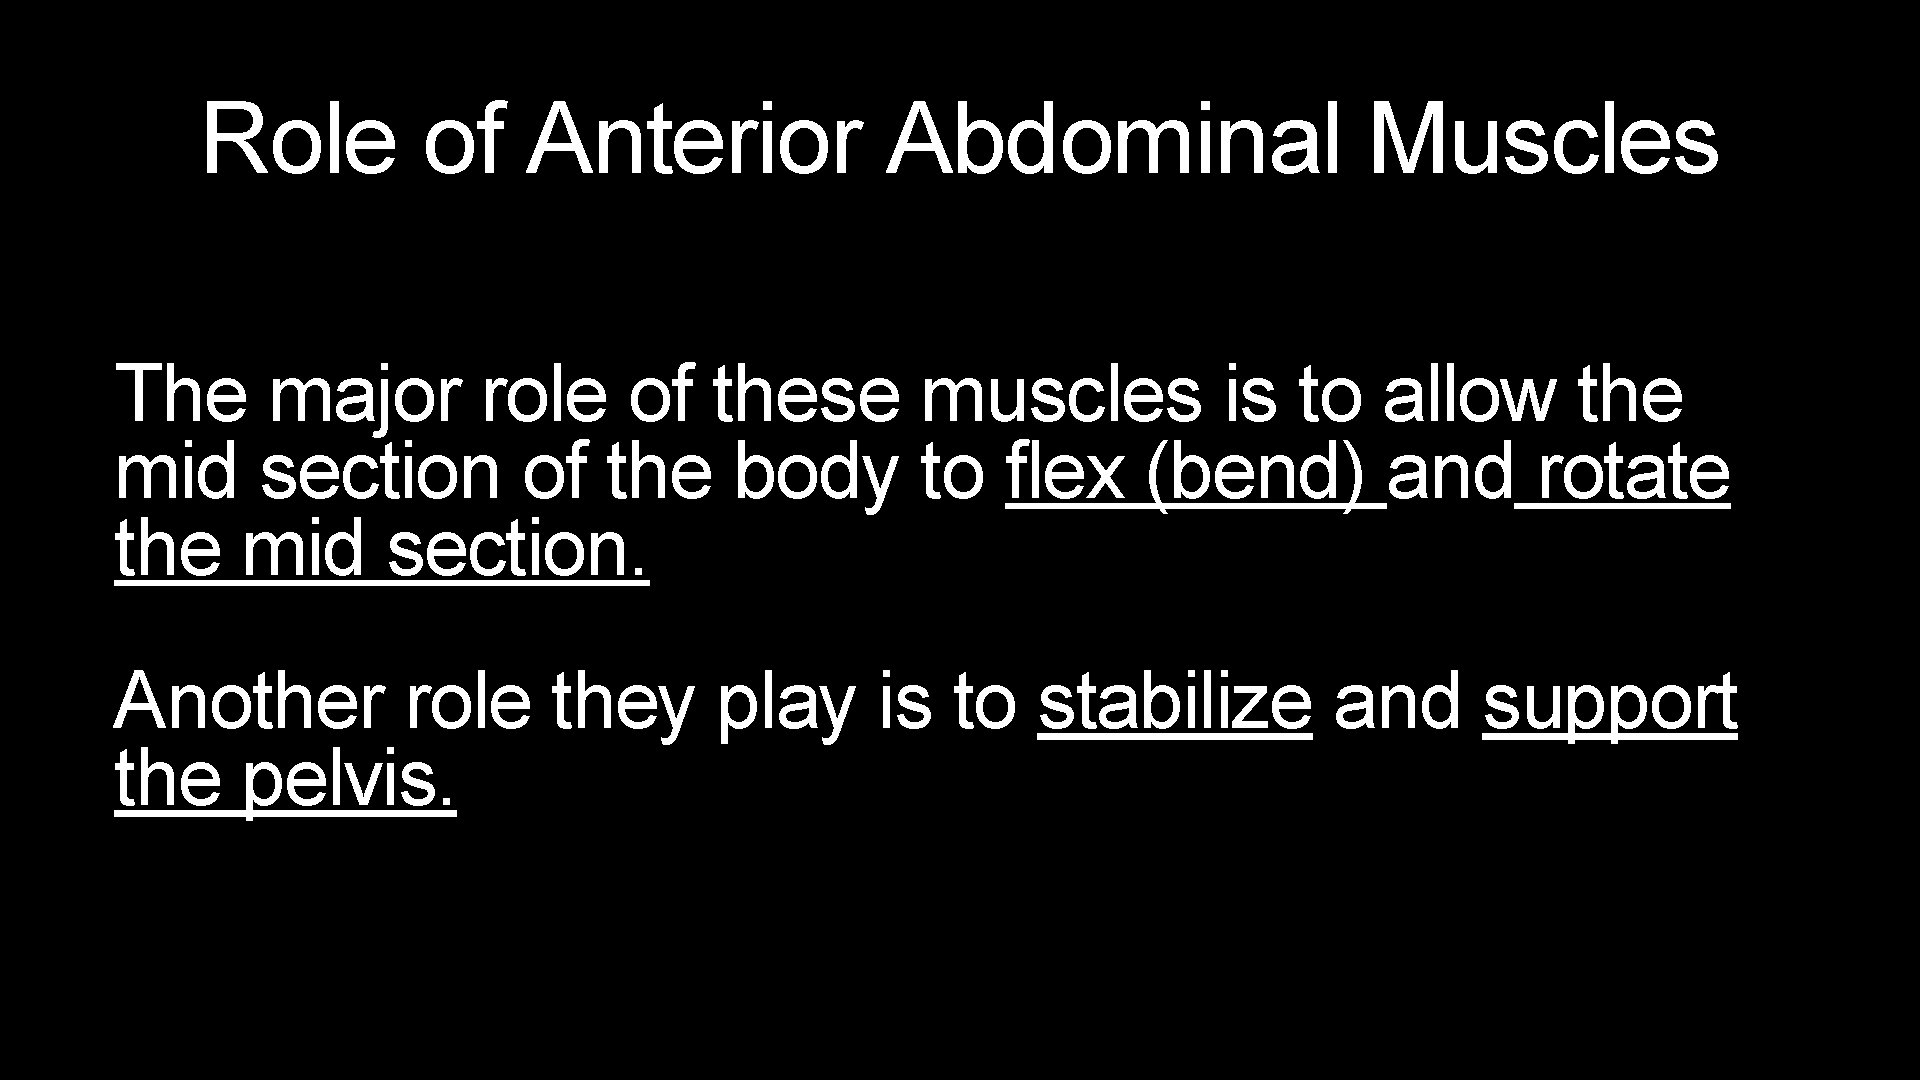 Role of Anterior Abdominal Muscles The major role of these muscles is to allow